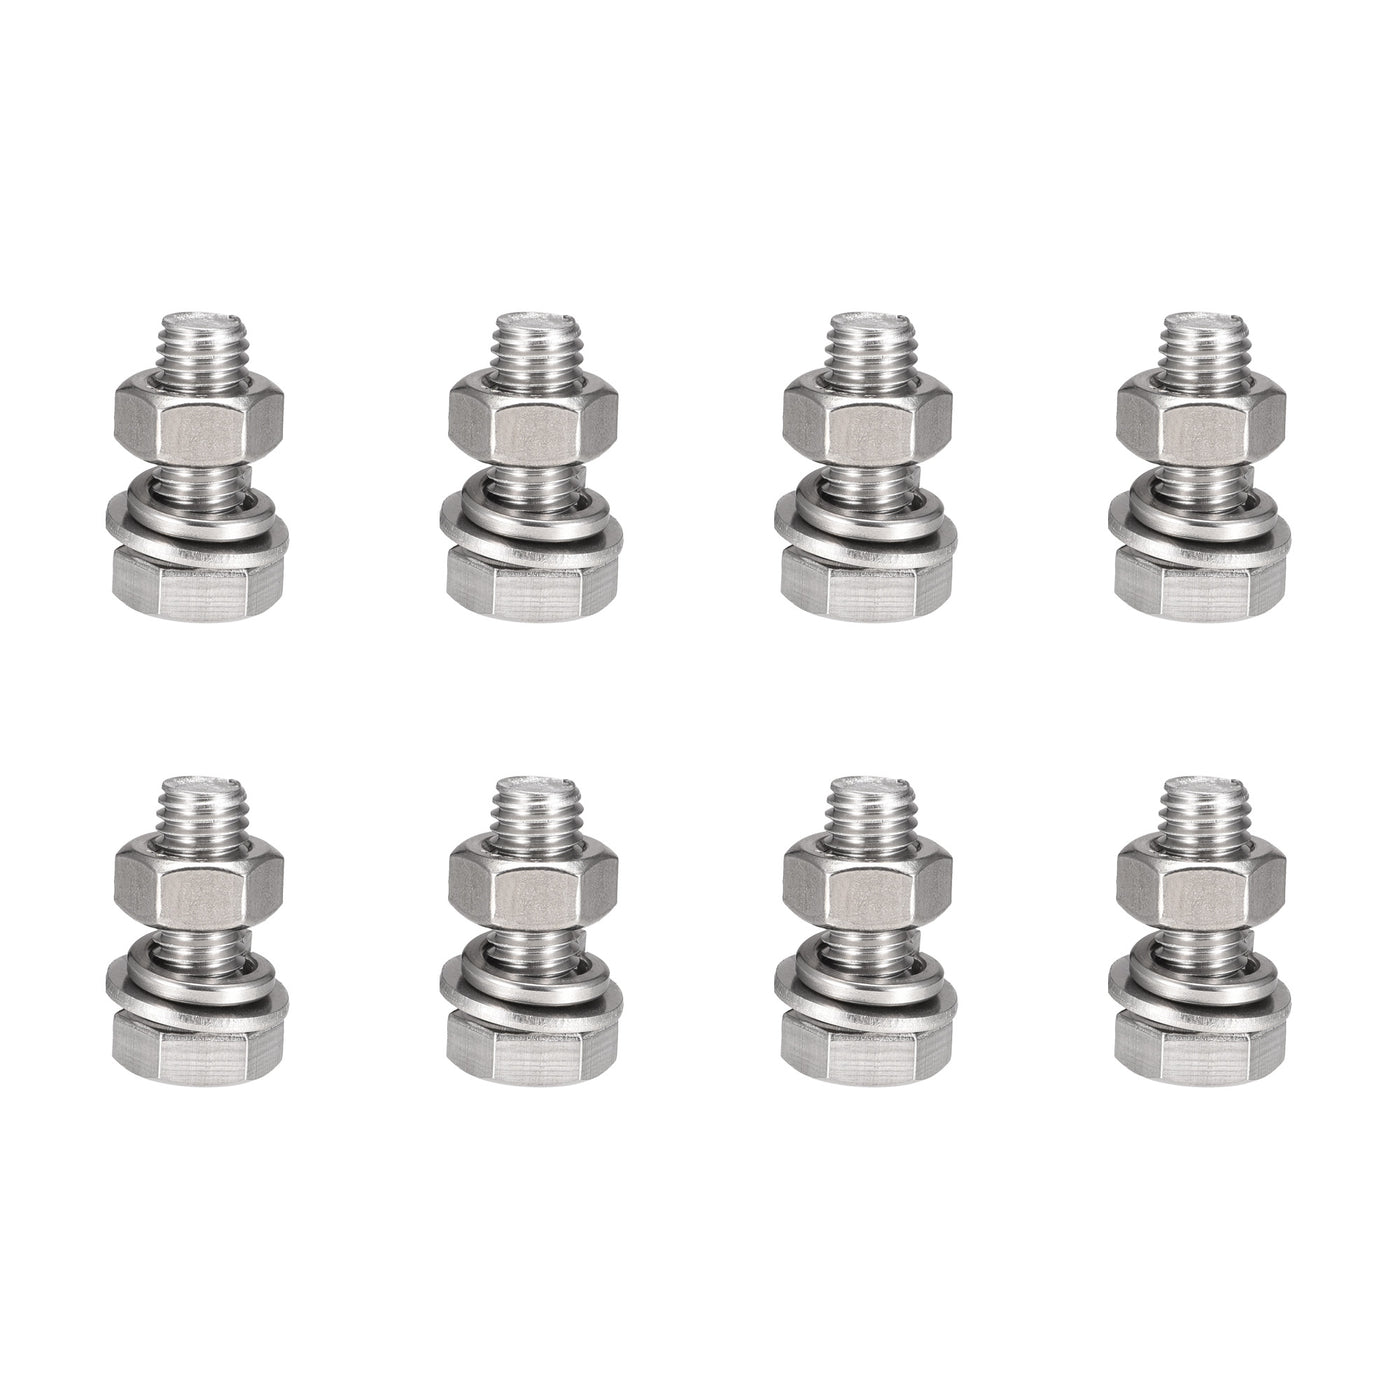 Uxcell Uxcell M10 x 35mm Hex Head Screws Bolts, Nuts, Flat & Lock Washers Kits, 304 Stainless Steel Fully Thread Hexagon Bolts 8 Sets